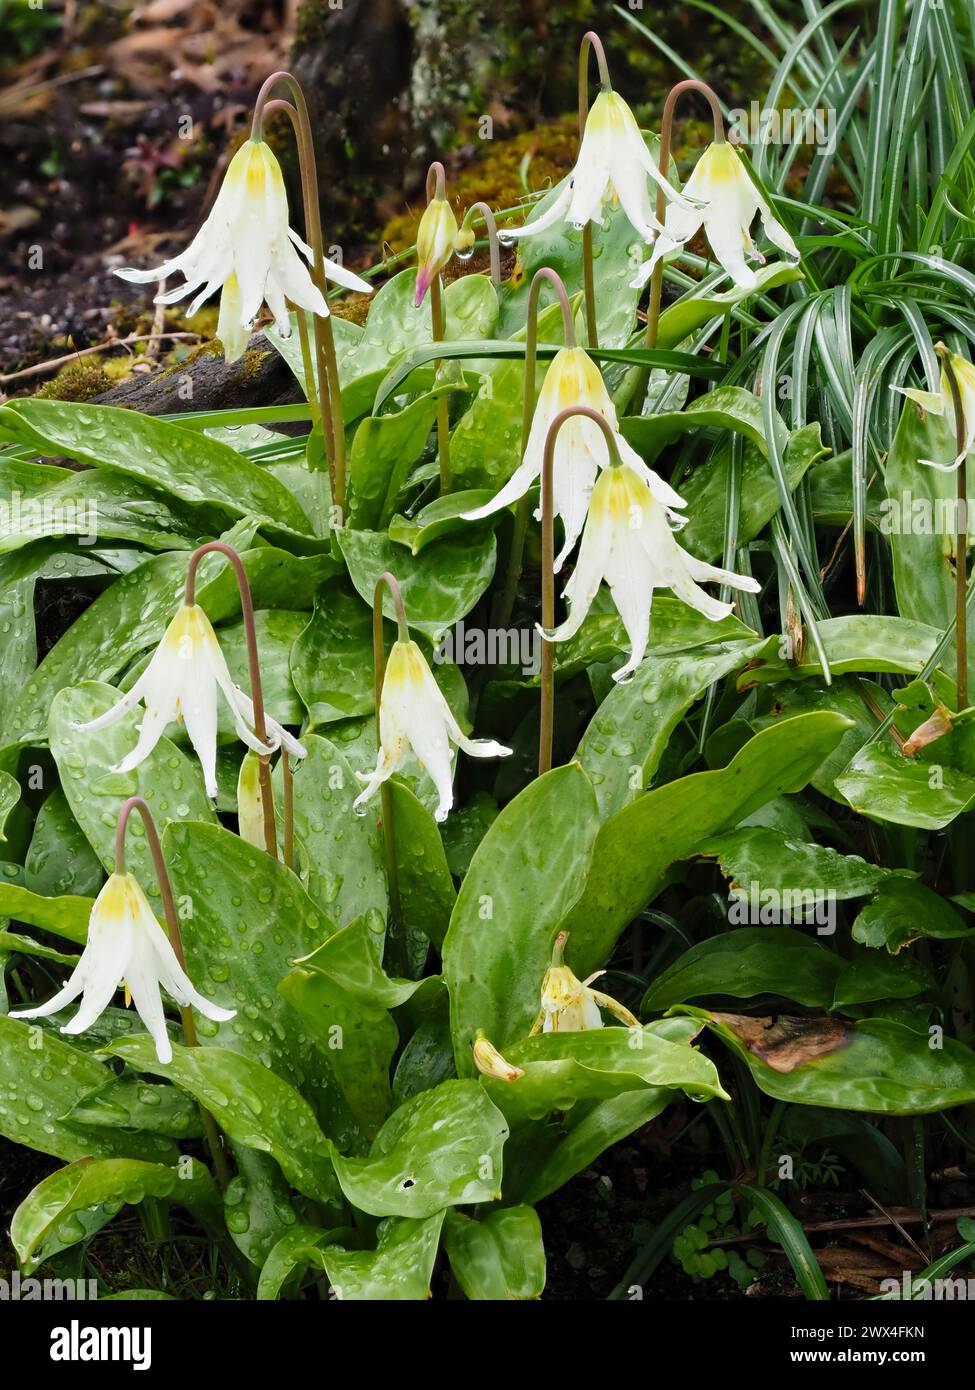 Reflexed white petals of the early spring flowering trout lily bulb, Erythronium californicum 'White Beauty' Stock Photo